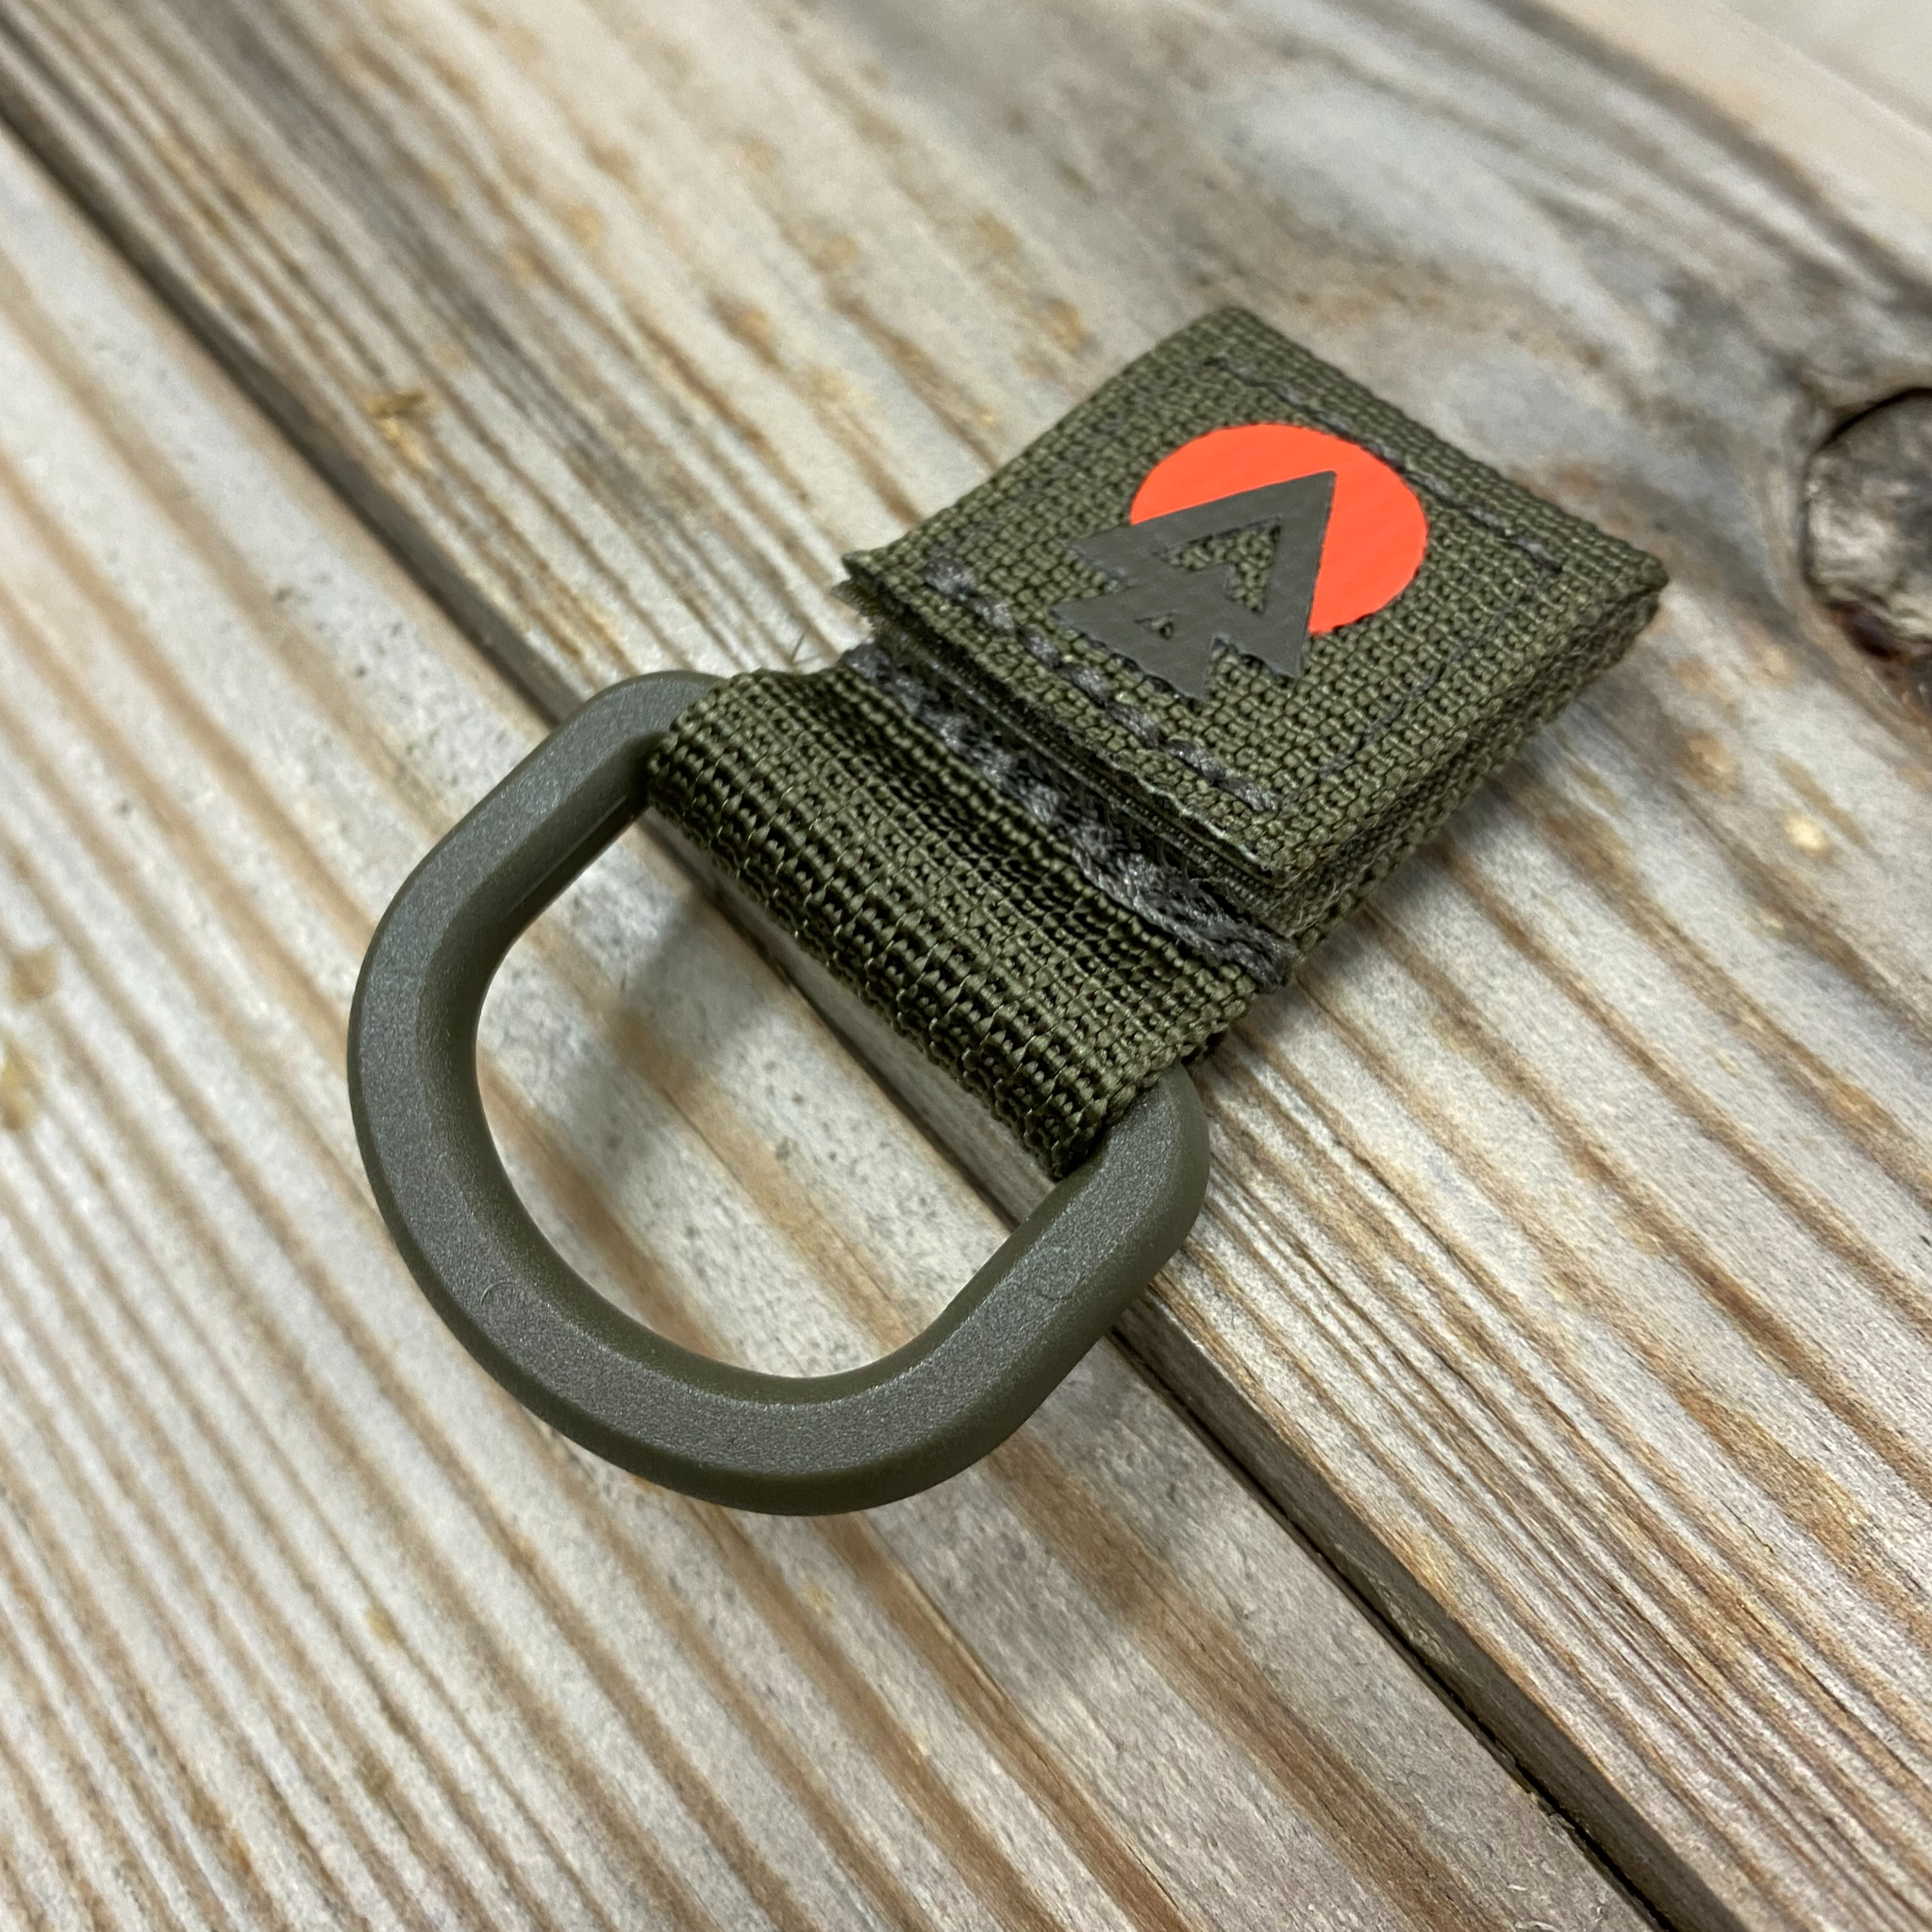 Molle Attachments : Straps, D-Ring Carabiner, Key Ring Holder